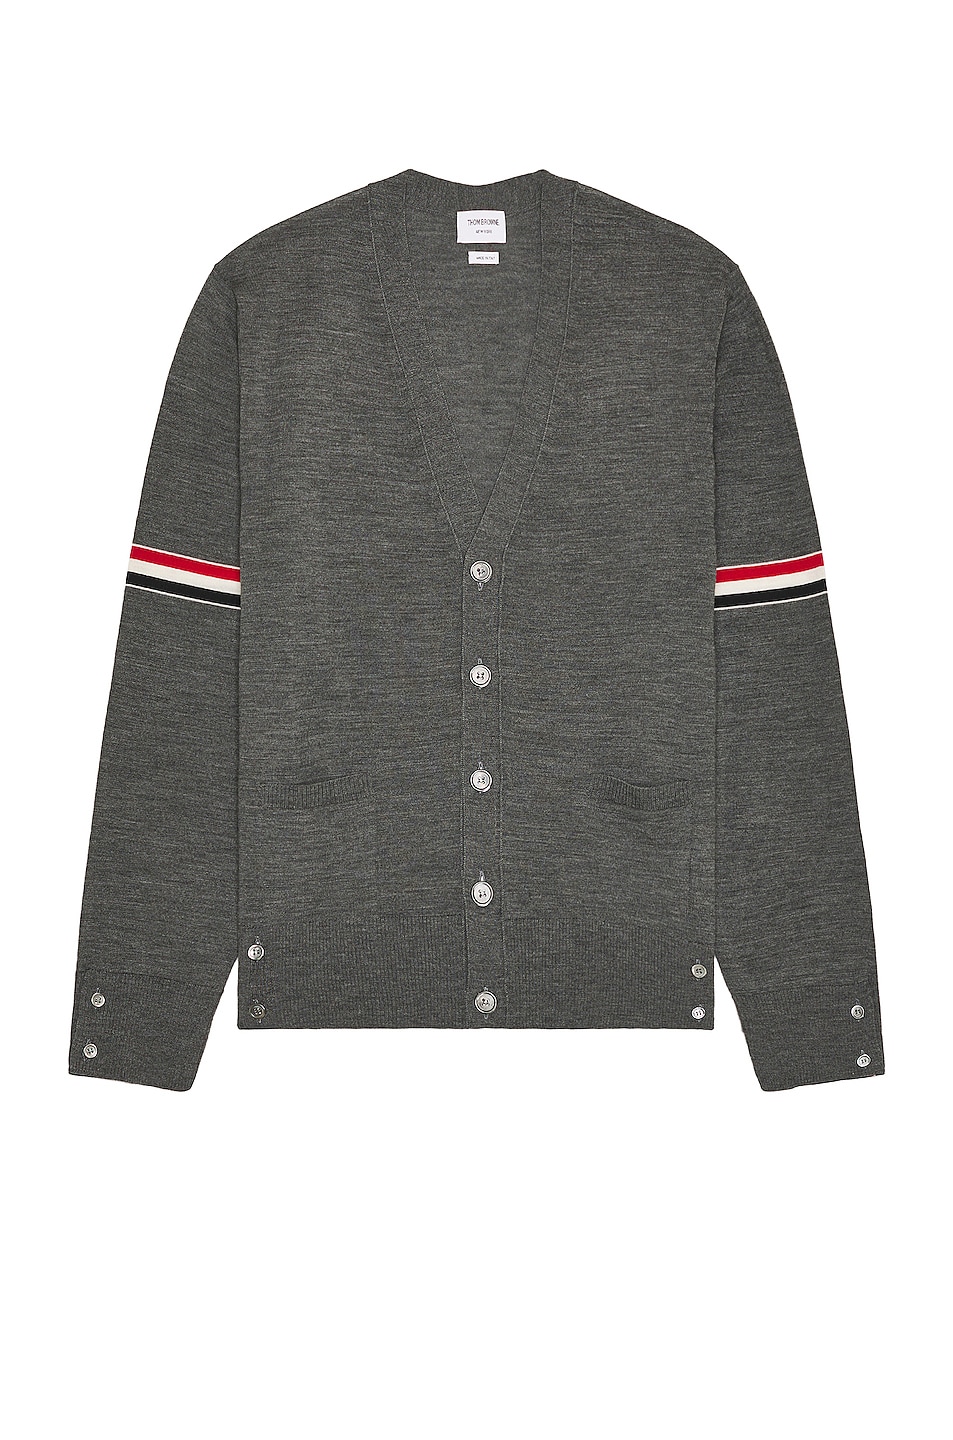 Image 1 of Thom Browne Armbands Cardigan in Med Grey